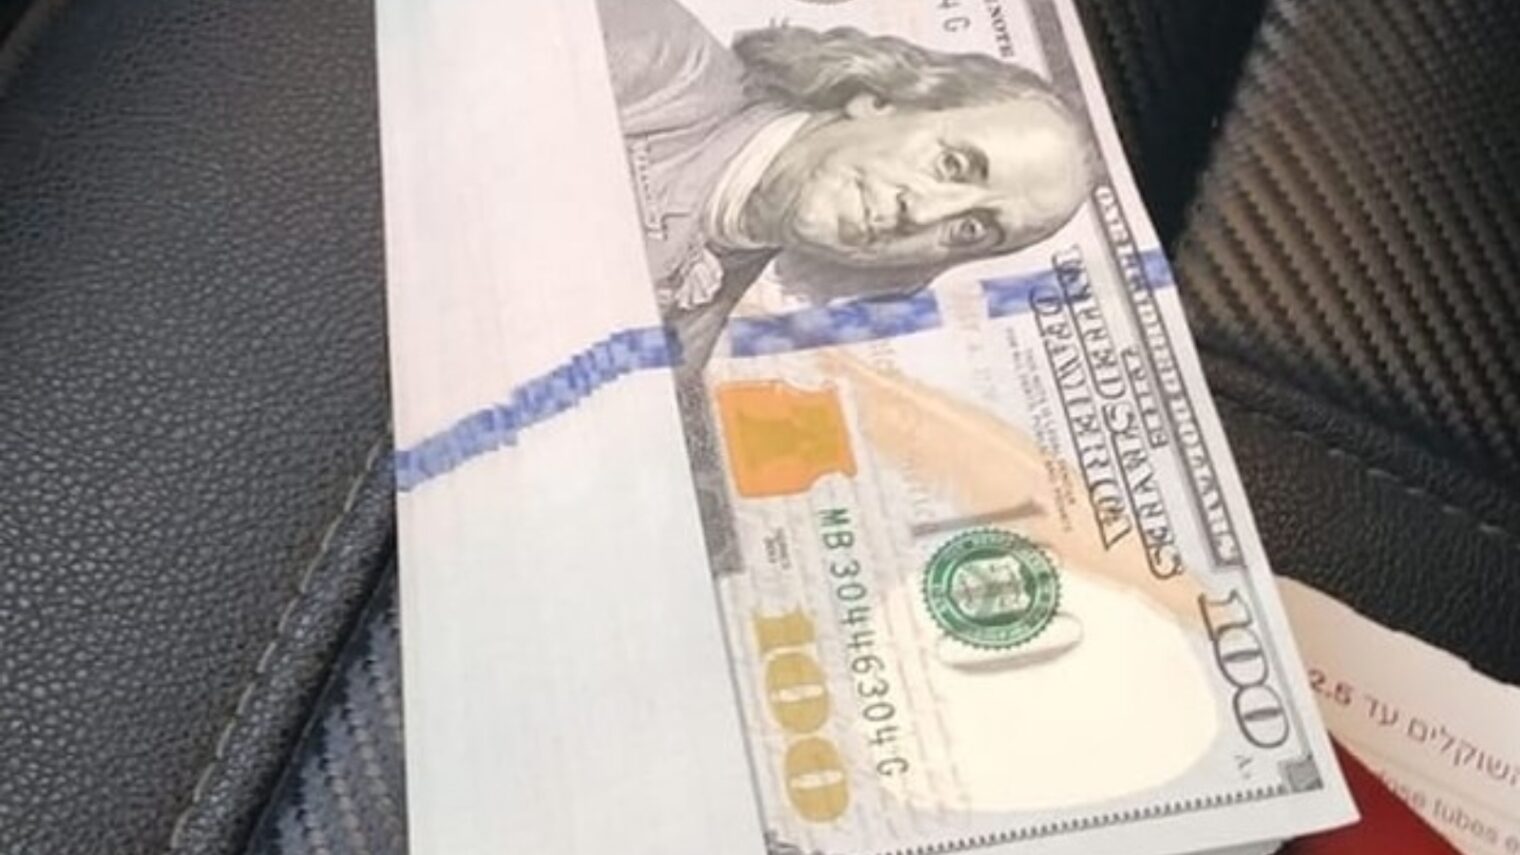 The cash found on the backseat of Moshe Barkat’s taxicab. Photo via Channel 2 News/Mako